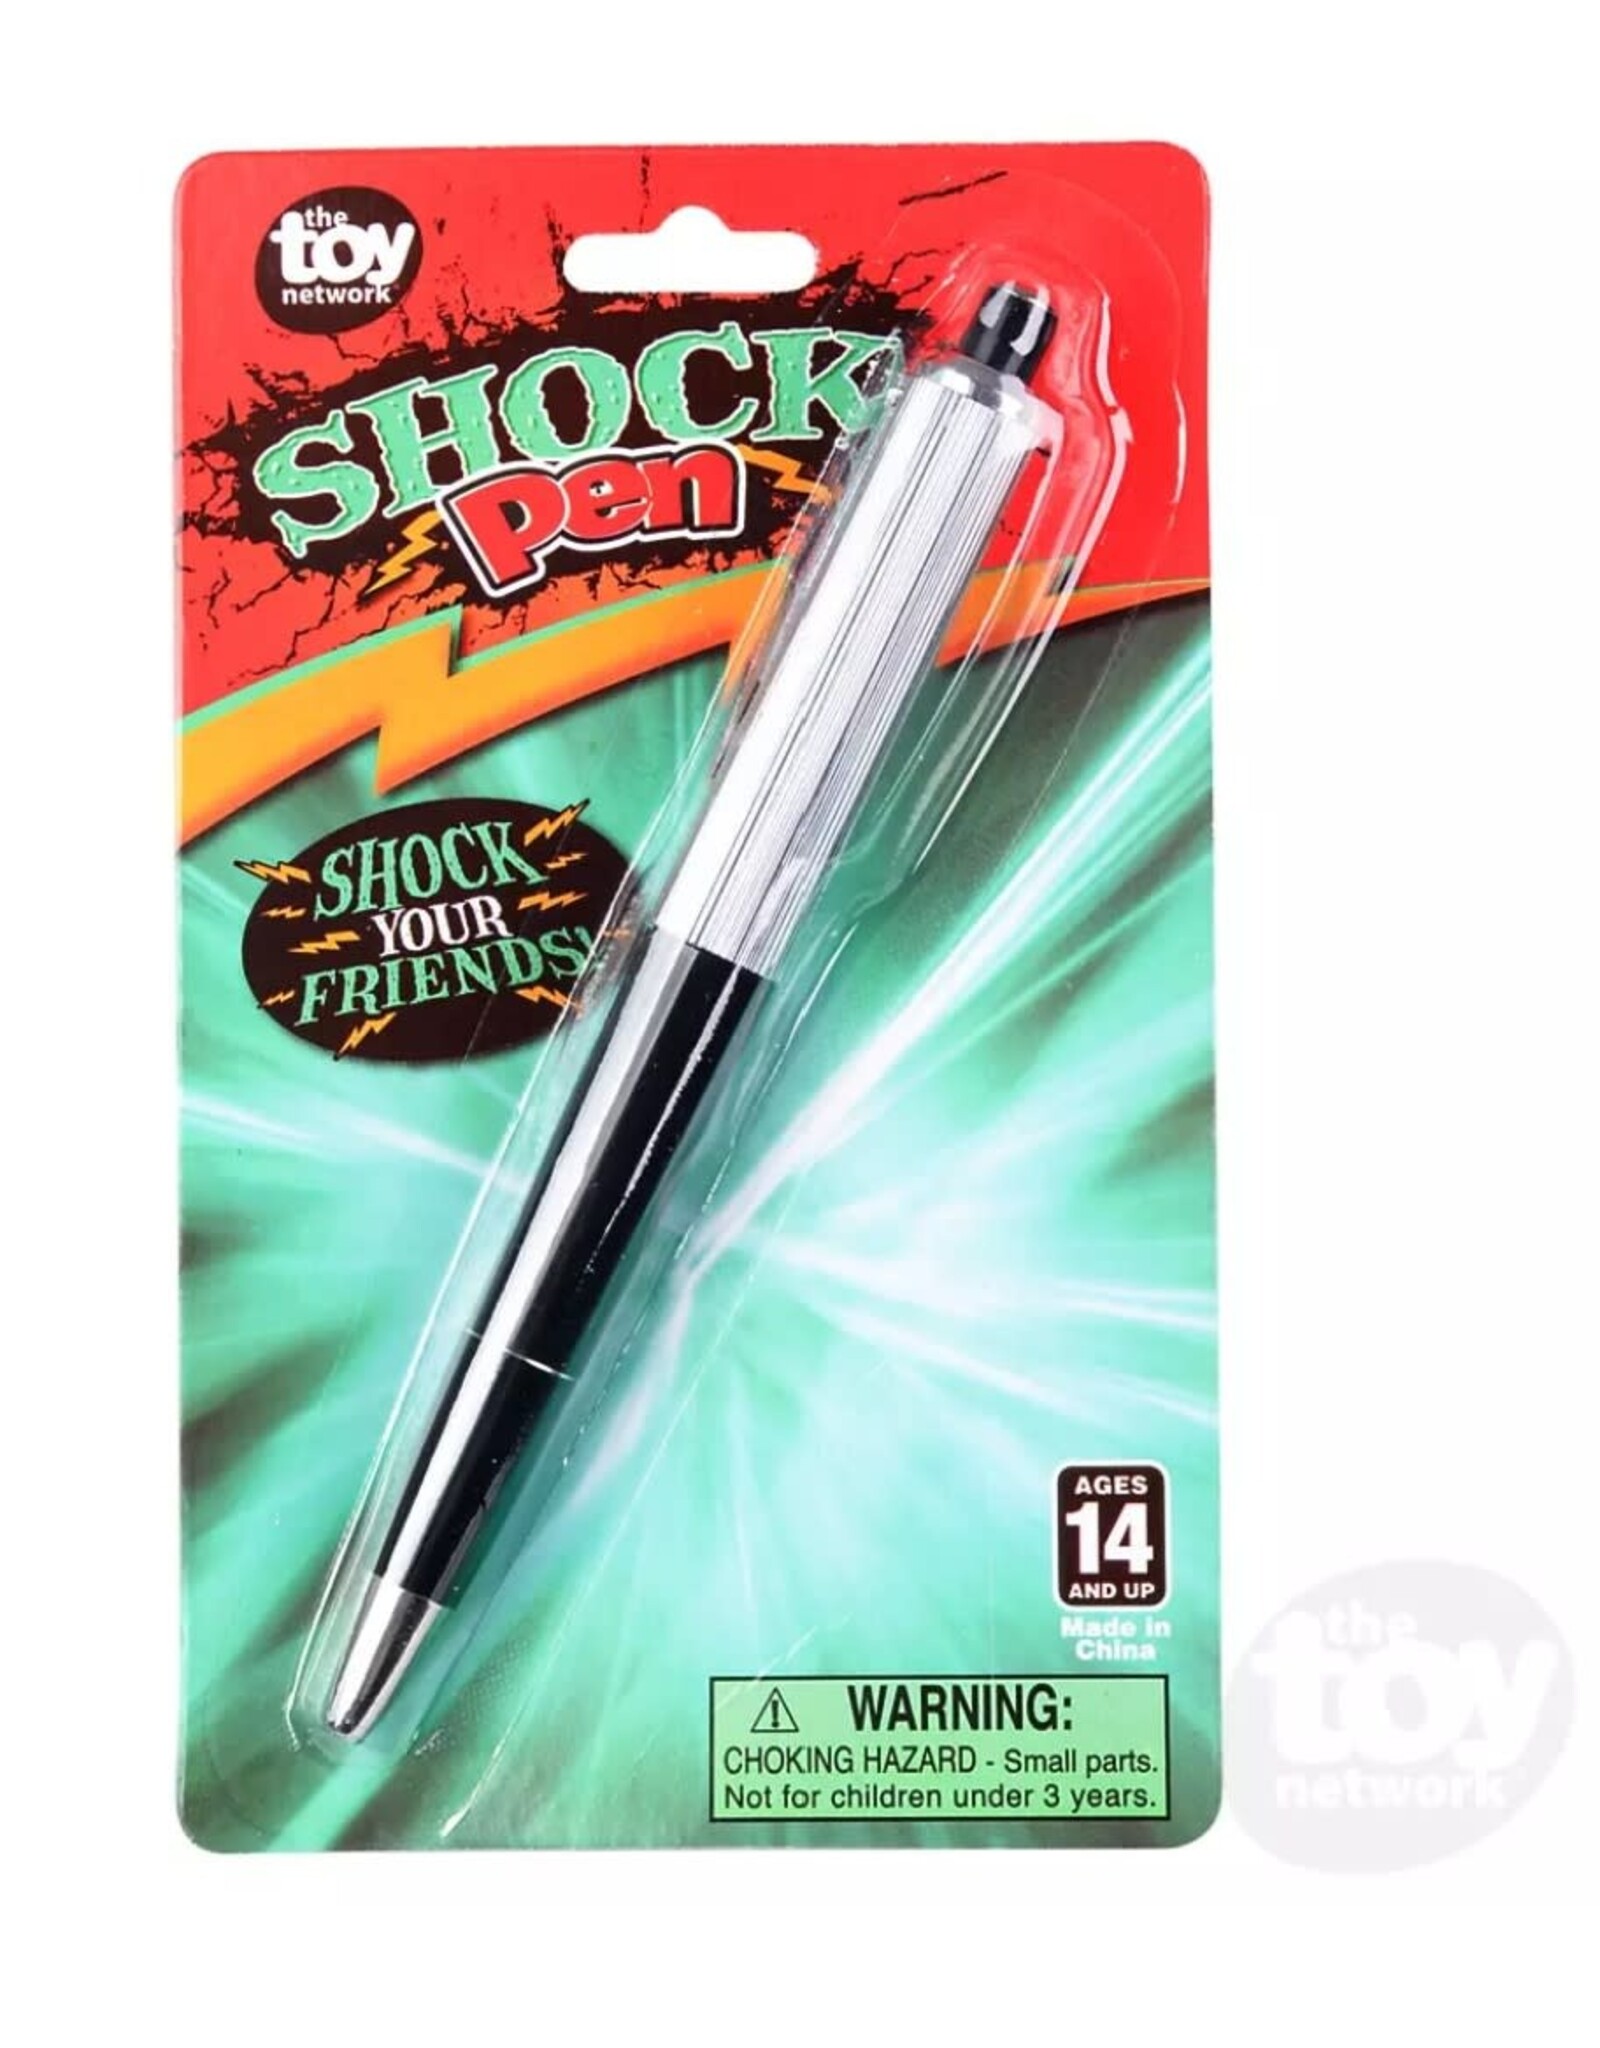 The Toy Network Shocking Pen